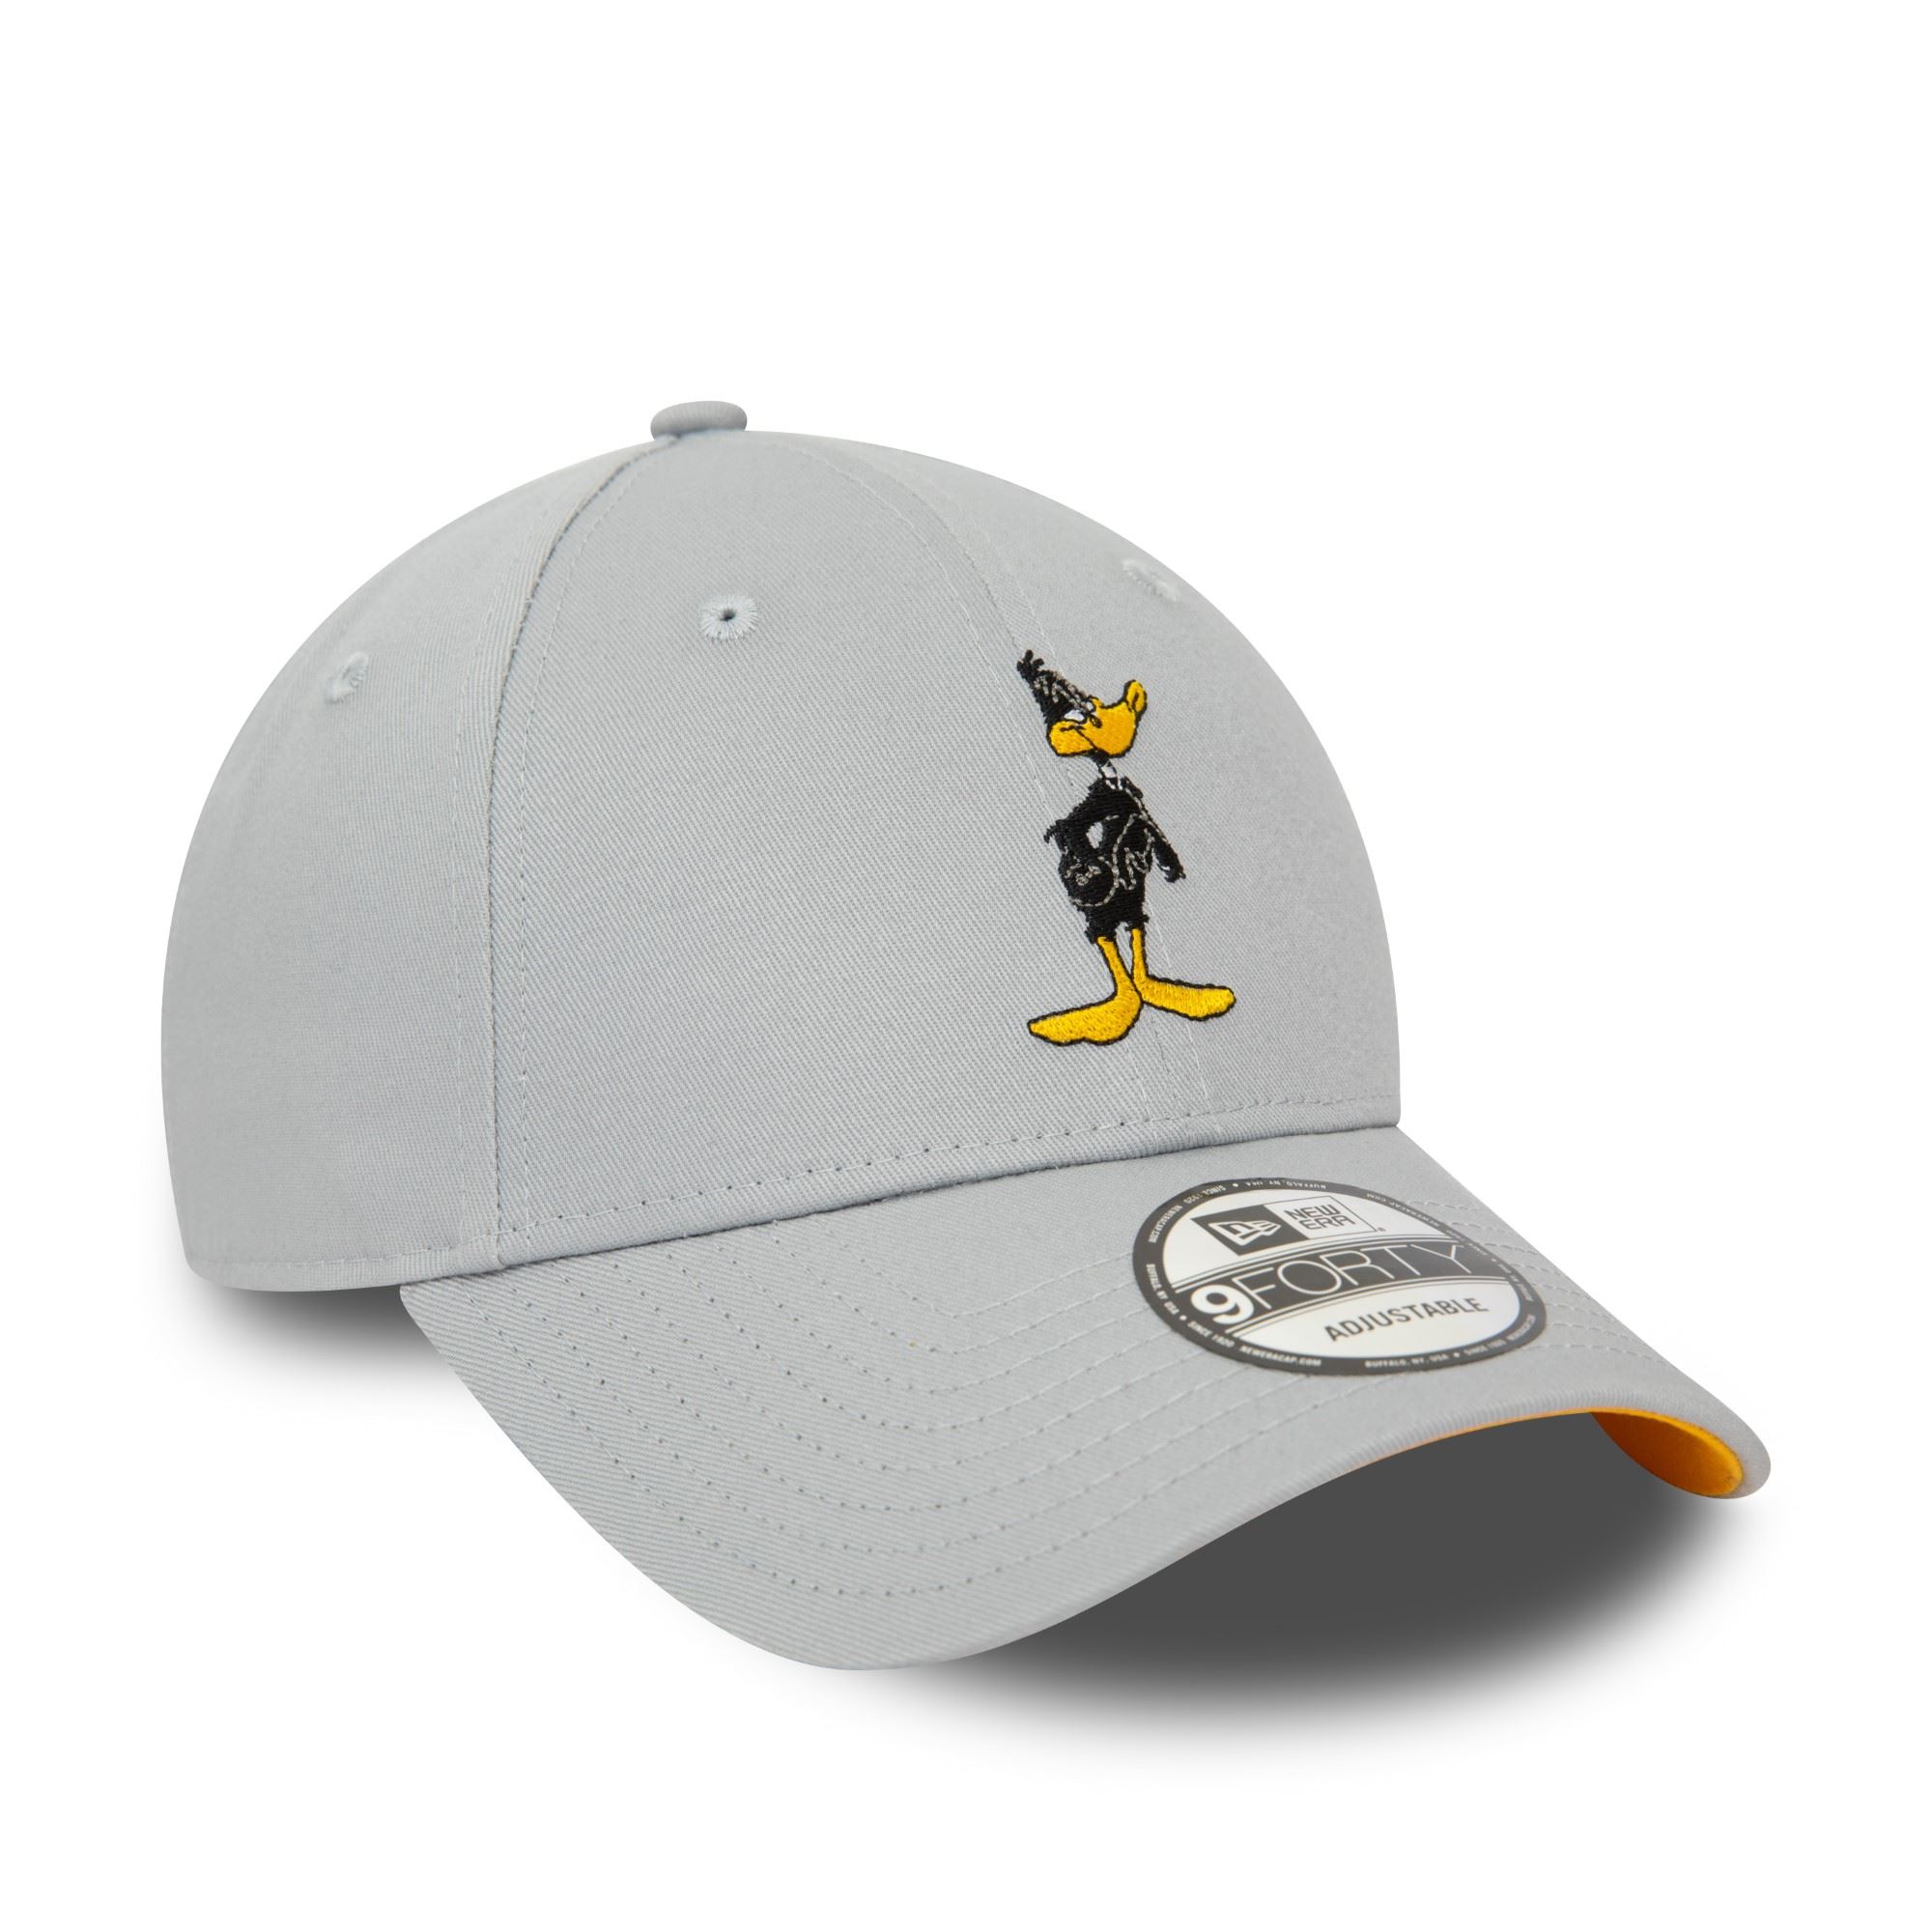 Daffy Duck Looney Tunes Character Grey 9Forty Adjustable Cap New Era